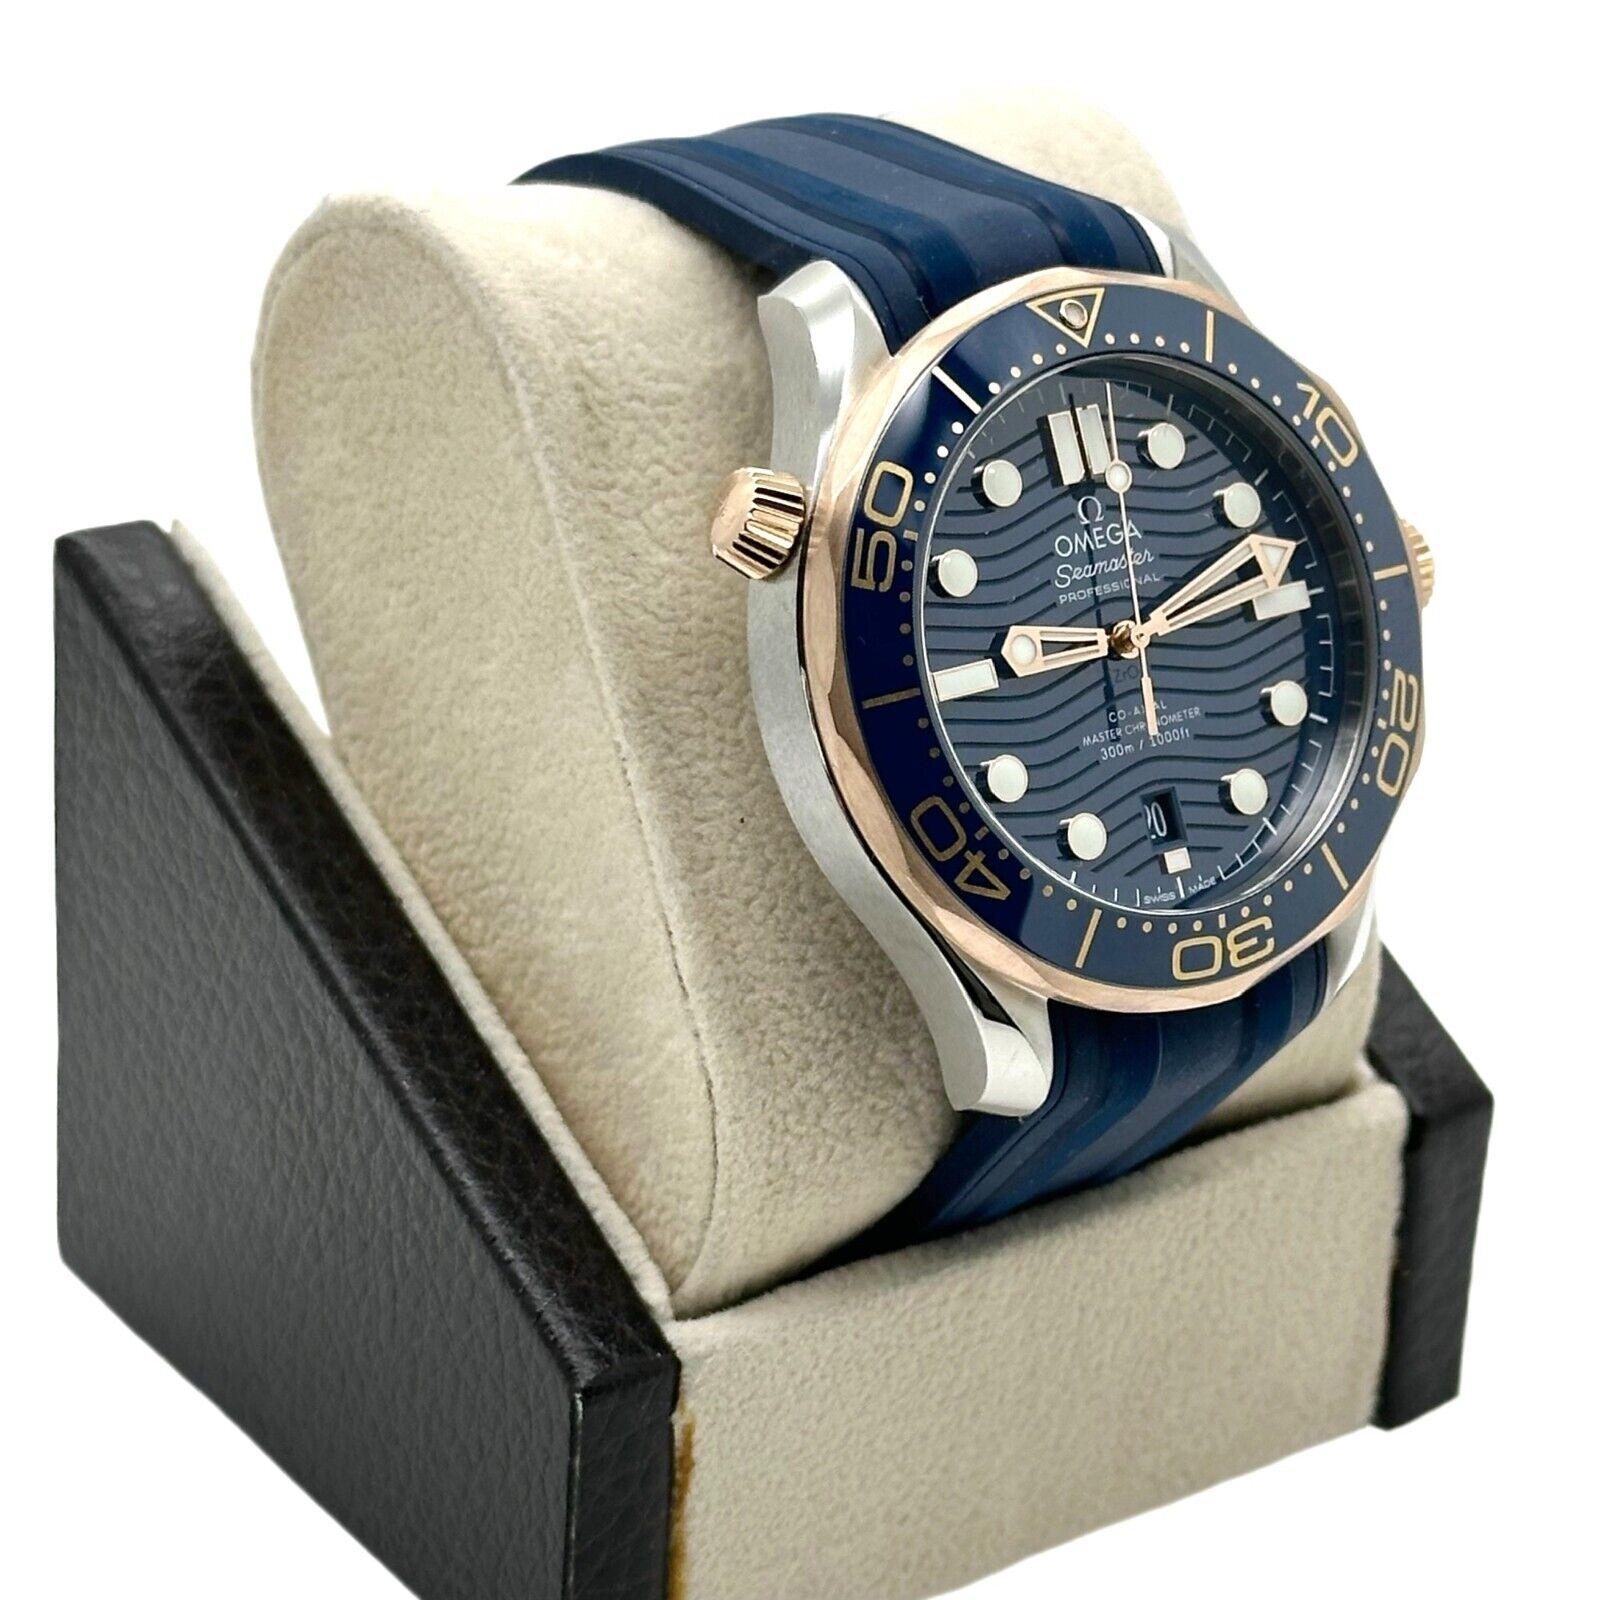 Style Number: 210.22.42.20.03.002

 

Model: Seamster 

 

Case Material: Stainless Steel  

 

Band: Blue Rubber 

 

Bezel: 18K Rose Gold Blue Insert  

 

Dial: Blue

 

Face: Sapphire Crystal 

 

Case Size: 42mm

 

Includes: 

-Omega Box &